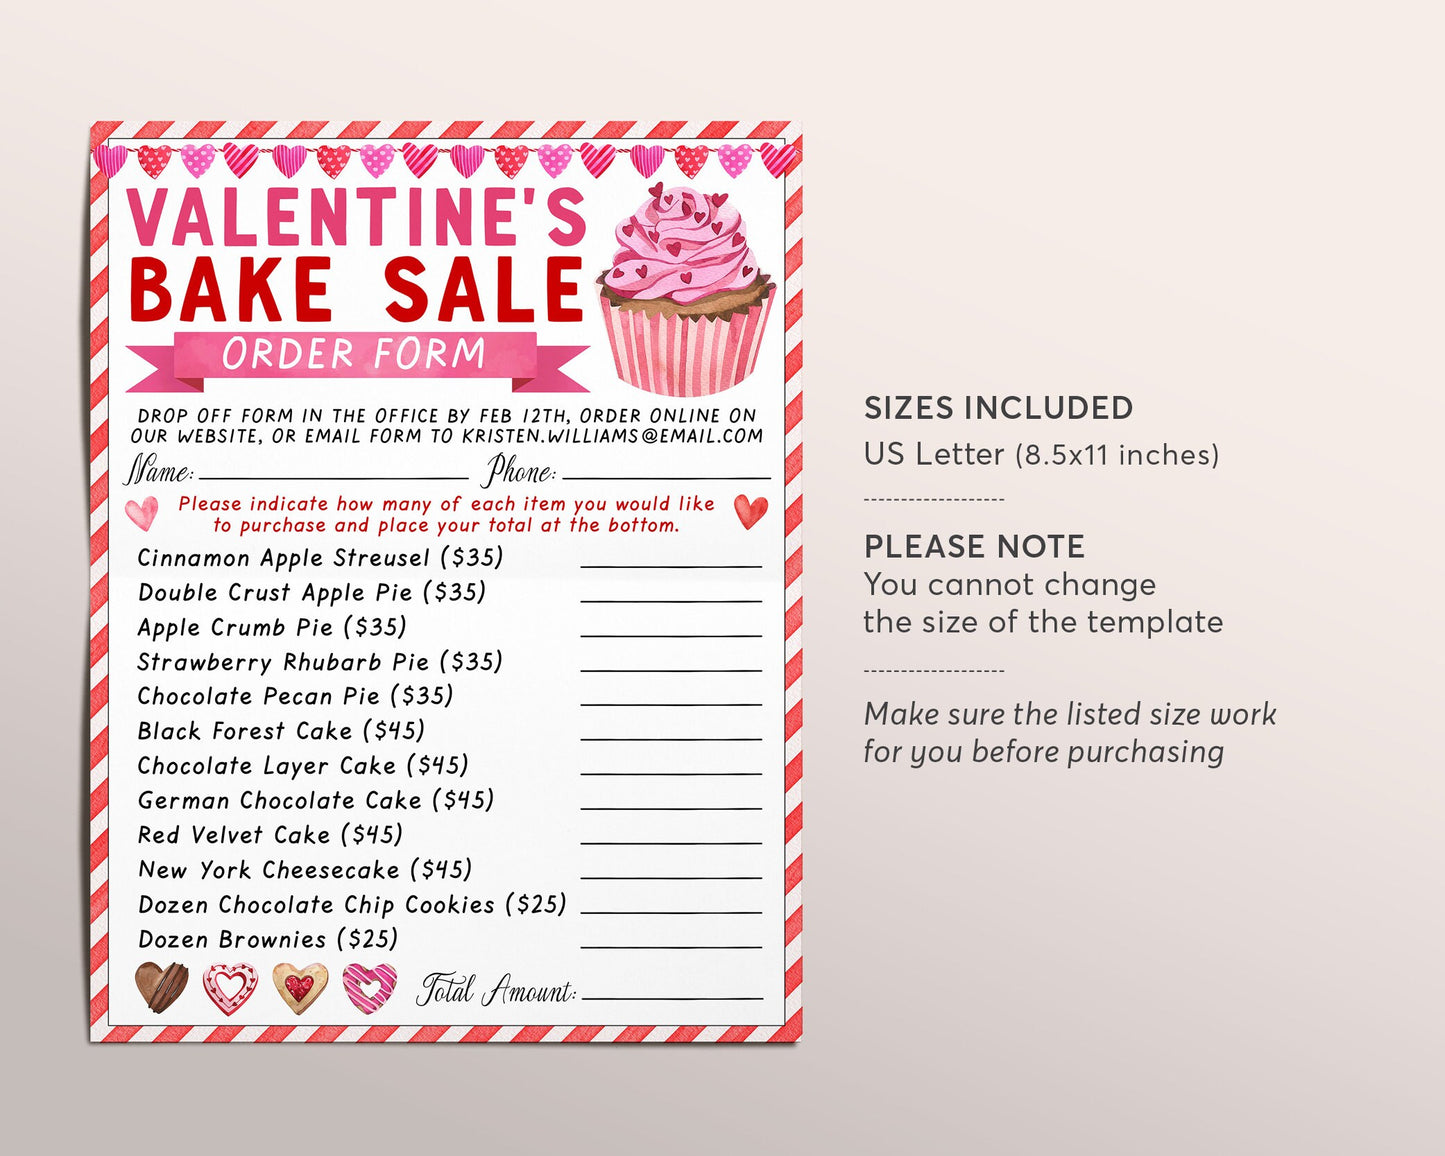 Valentines Day Bake Sale Order Form Editable Template, Valentine Fundraiser Bakery Cookie Cake Chocolate Pie Sale Order Form, School PTO PTA